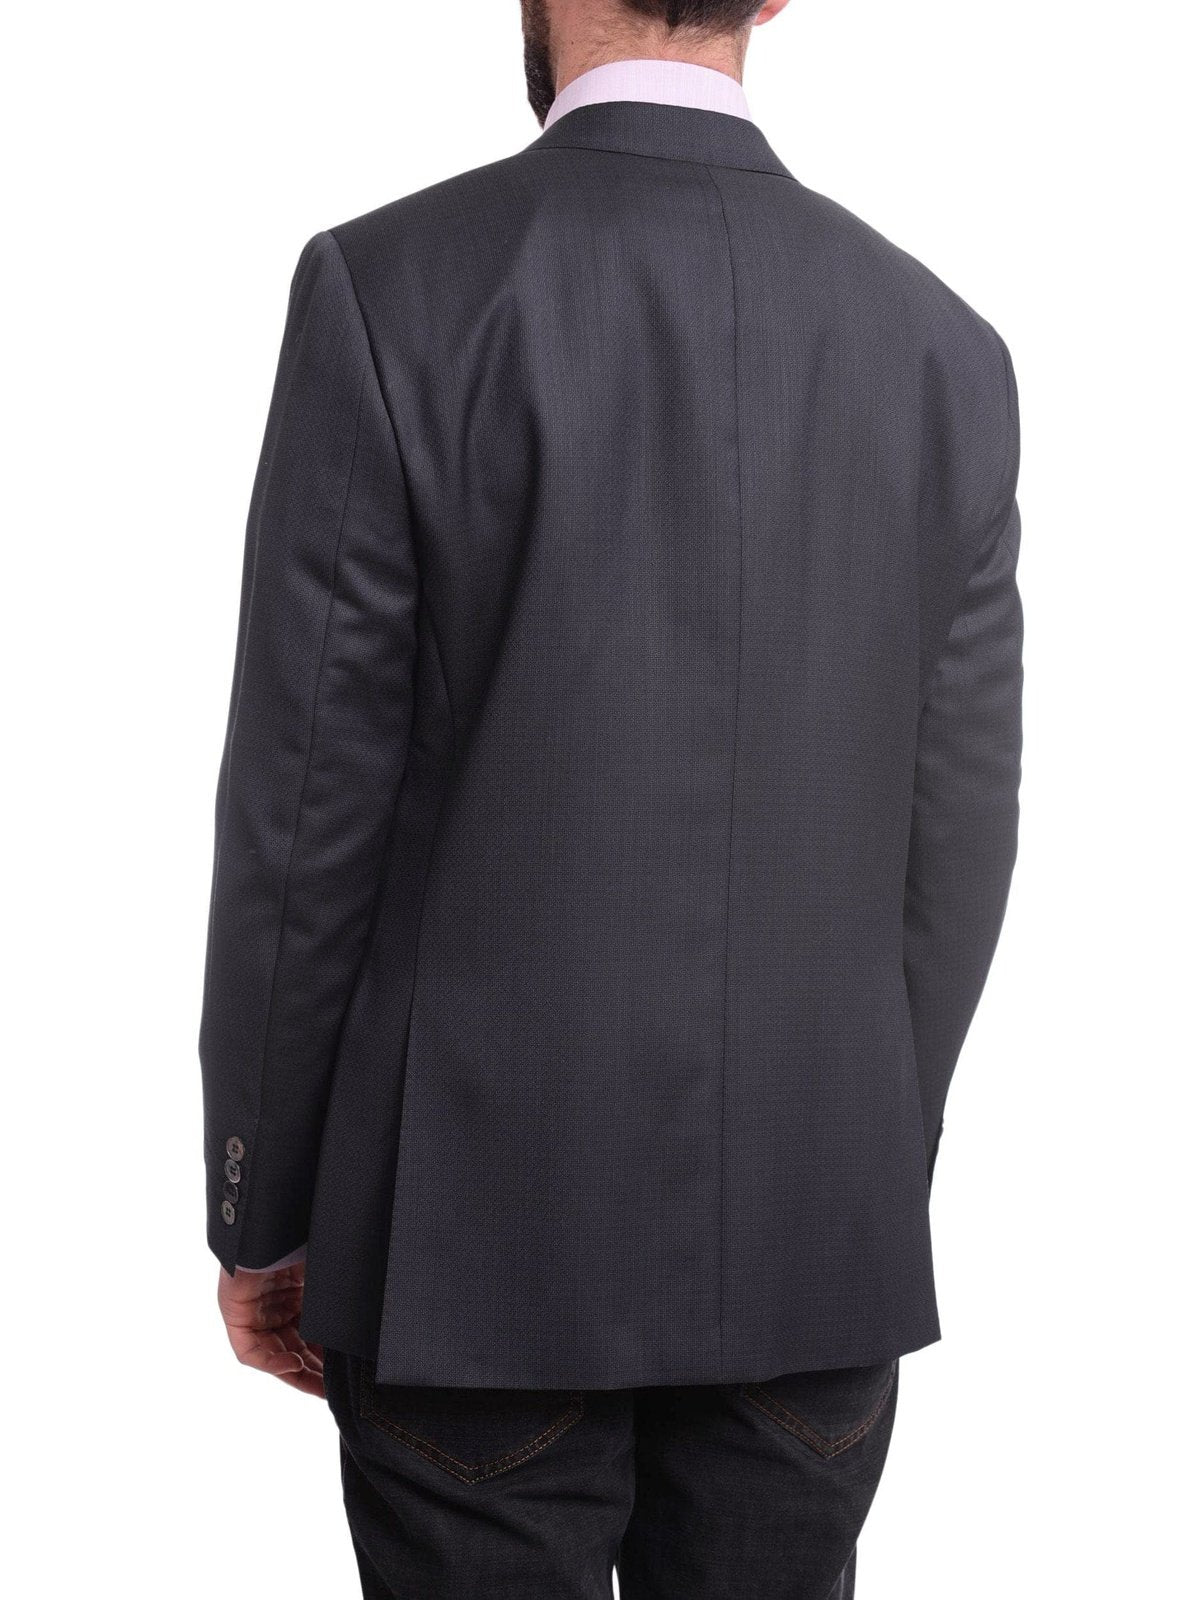 Back view of Classic Fit Navy Blue Basket Weave Half Canvassed Reda Wool Blazer